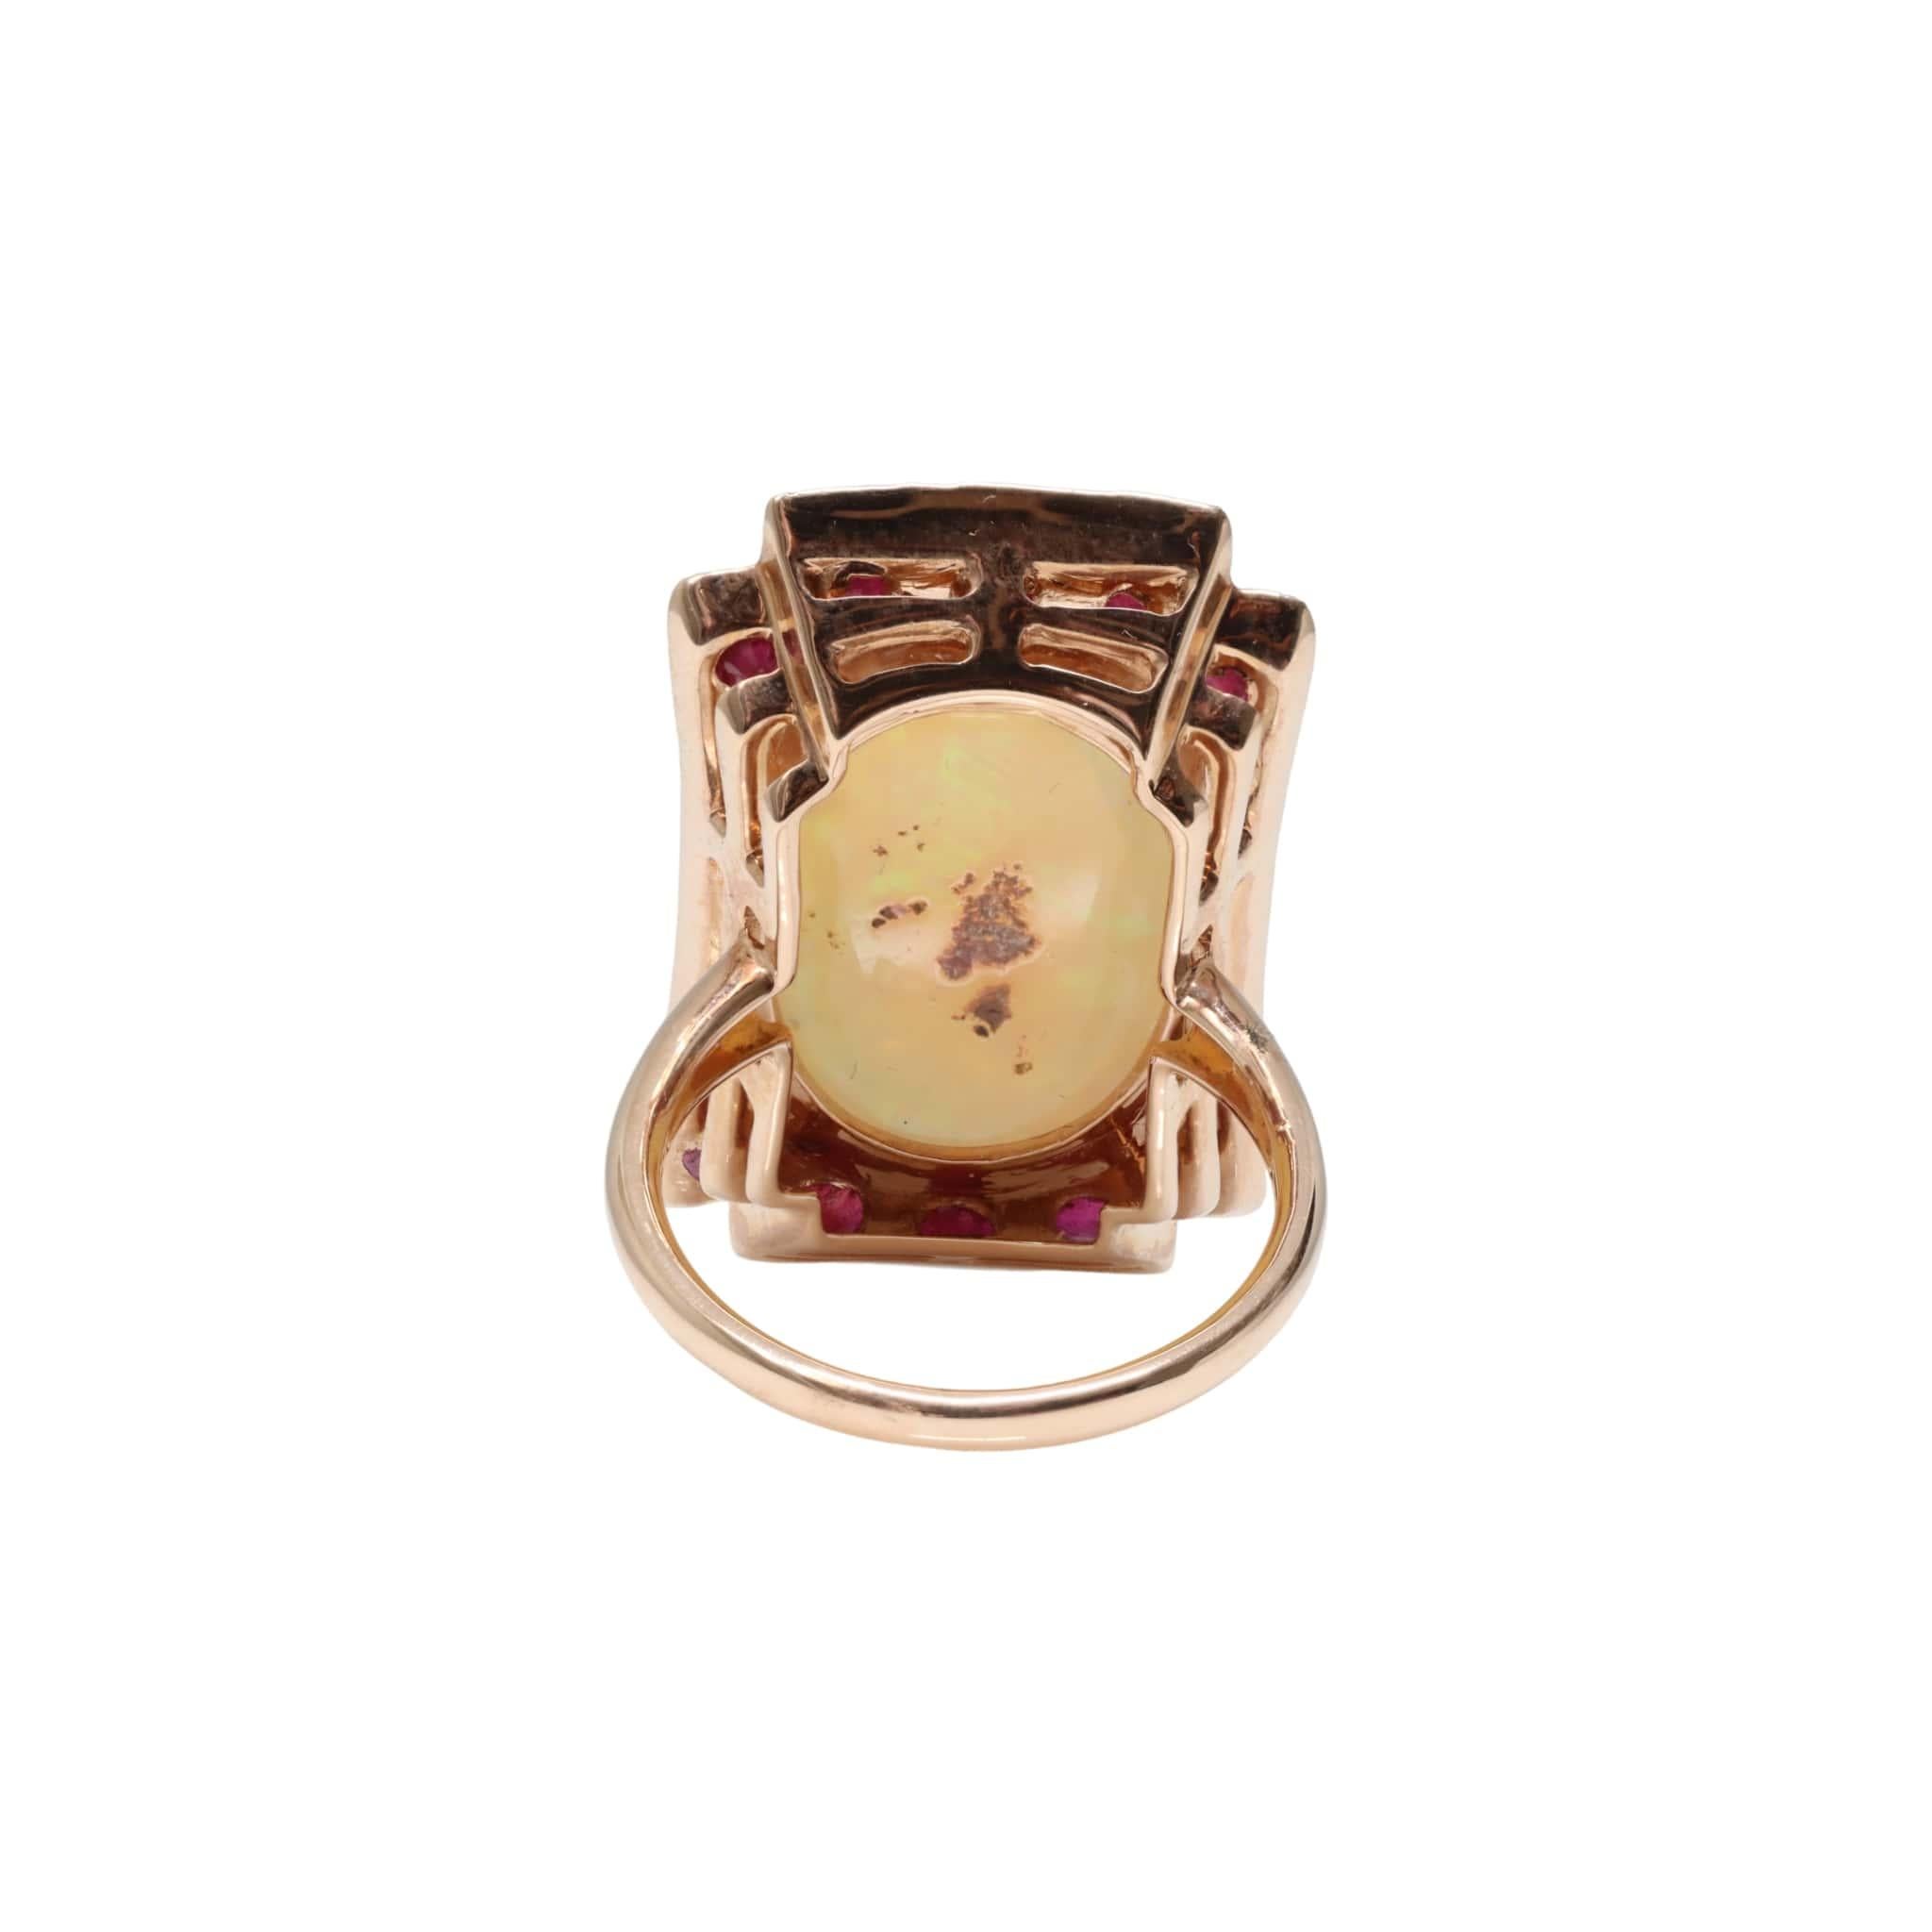 One ladies - 14ct rose gold dress ring, narrow, high half round, tapered shank with open back, 4 claw setting, polished finish. The item contains:

One claw set oval crystal opal cabochon, with orange, green play of colours.

Dimensions = 19.3mm(L)